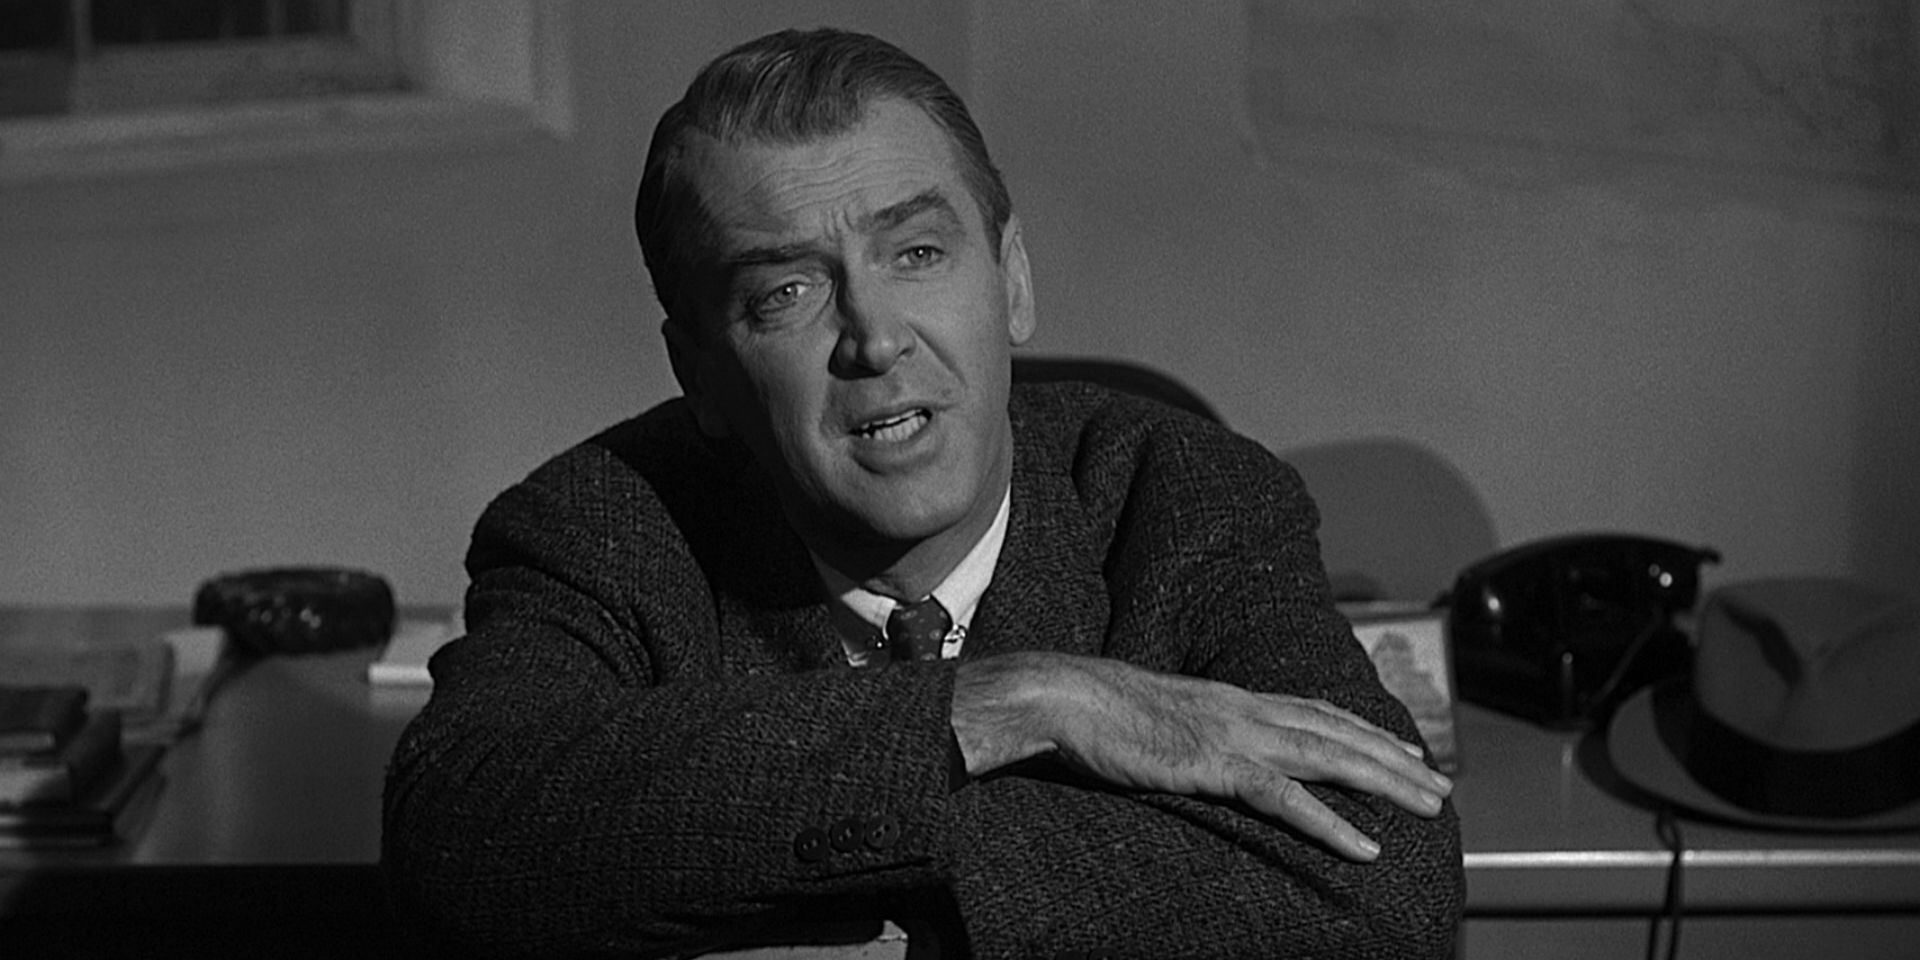 Paul Biegler, played by Jimmy Stewart, sitting down and leaning forward with his arms crossed on top of a chair while speaking to someone in Anatomy of a Murder